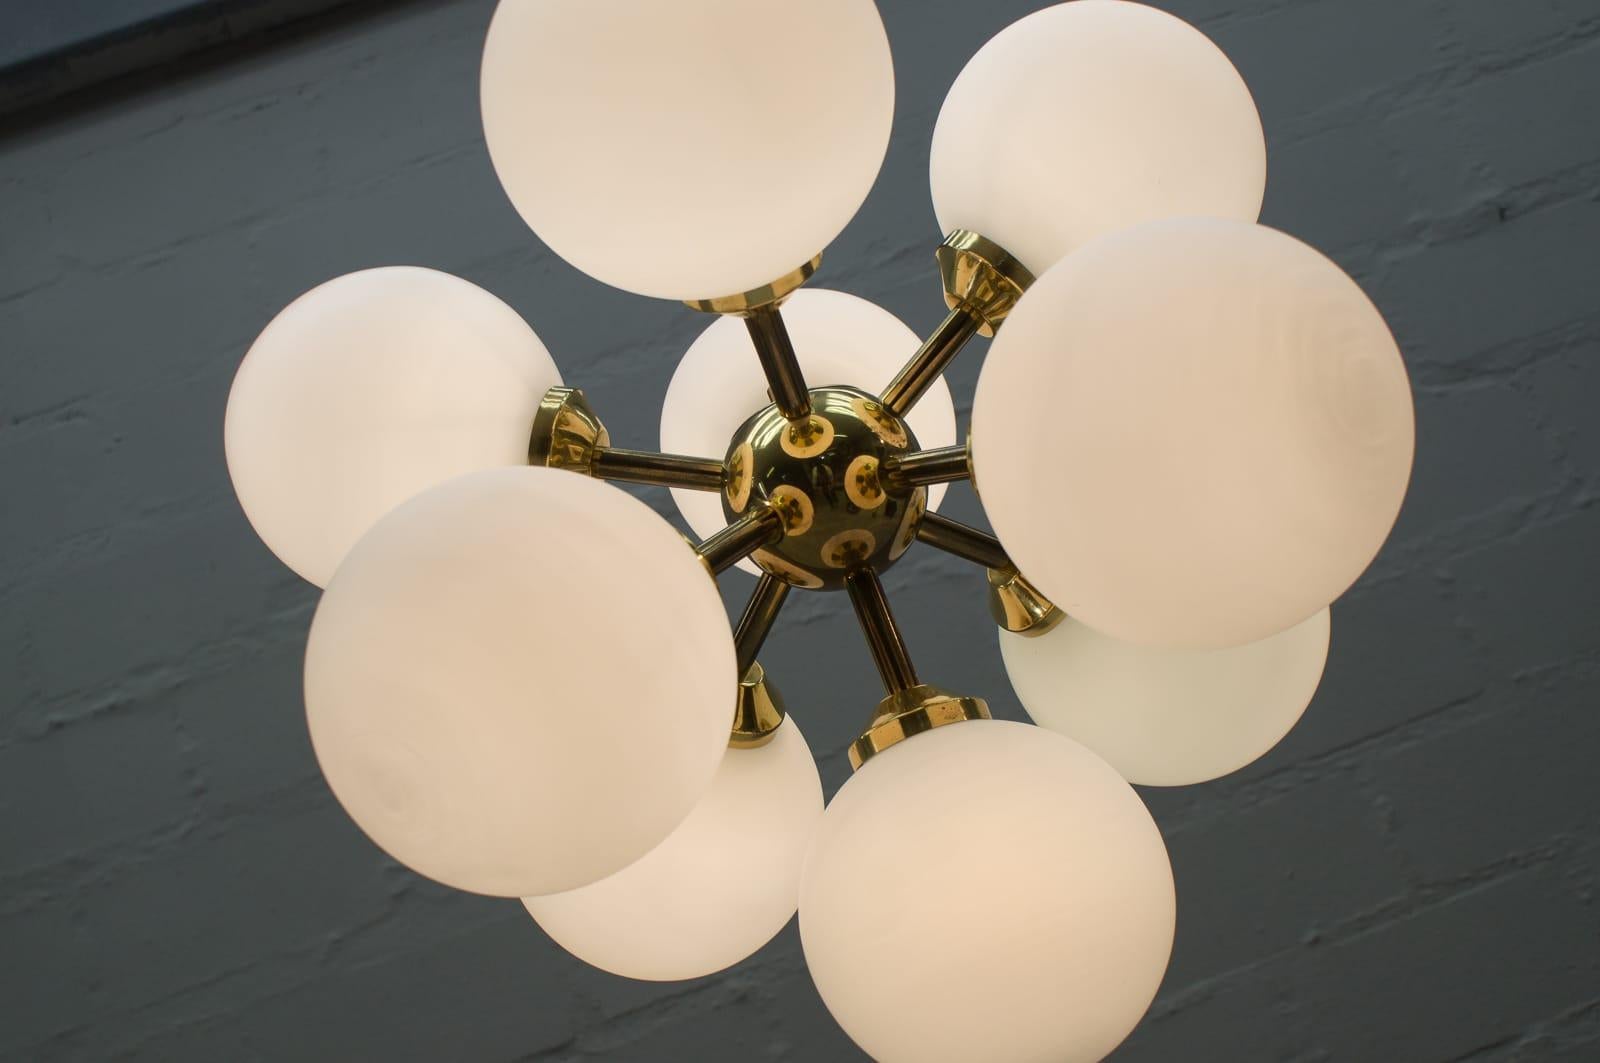 Rare 1960s Orbit or Ceiling Lamp with 9 Opaline Glasses In Good Condition For Sale In Nürnberg, Bayern